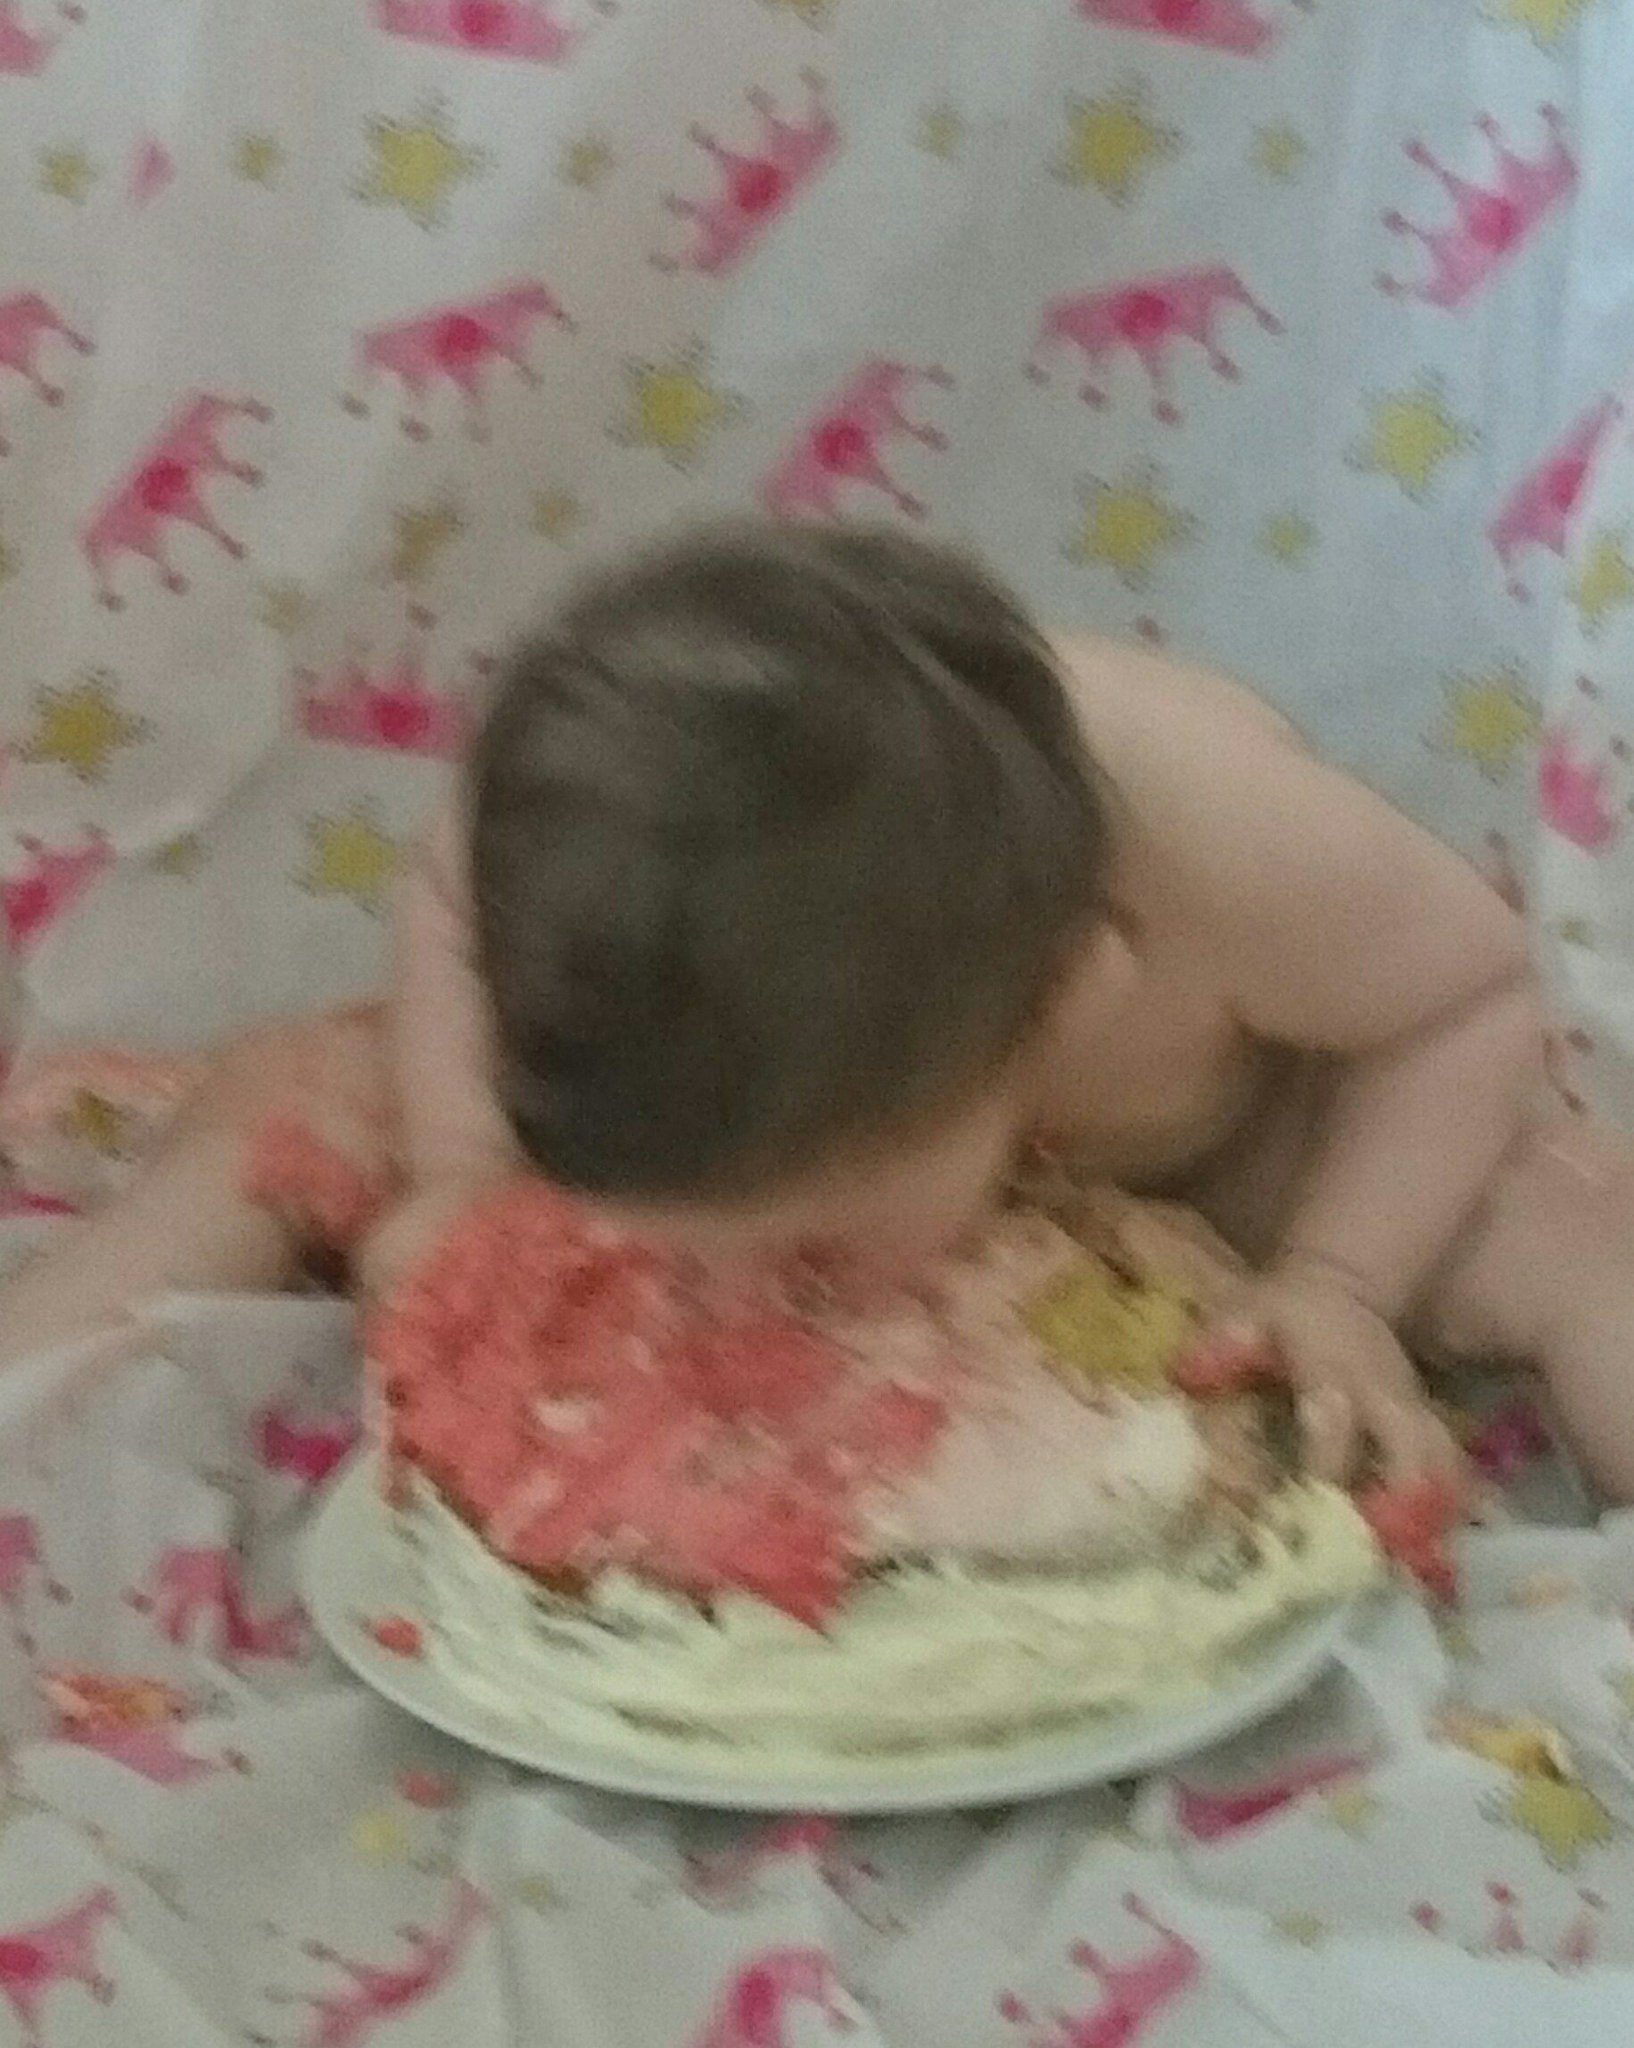 Happy Birthday you share it with my baby niece.
She likes cake as much as you 